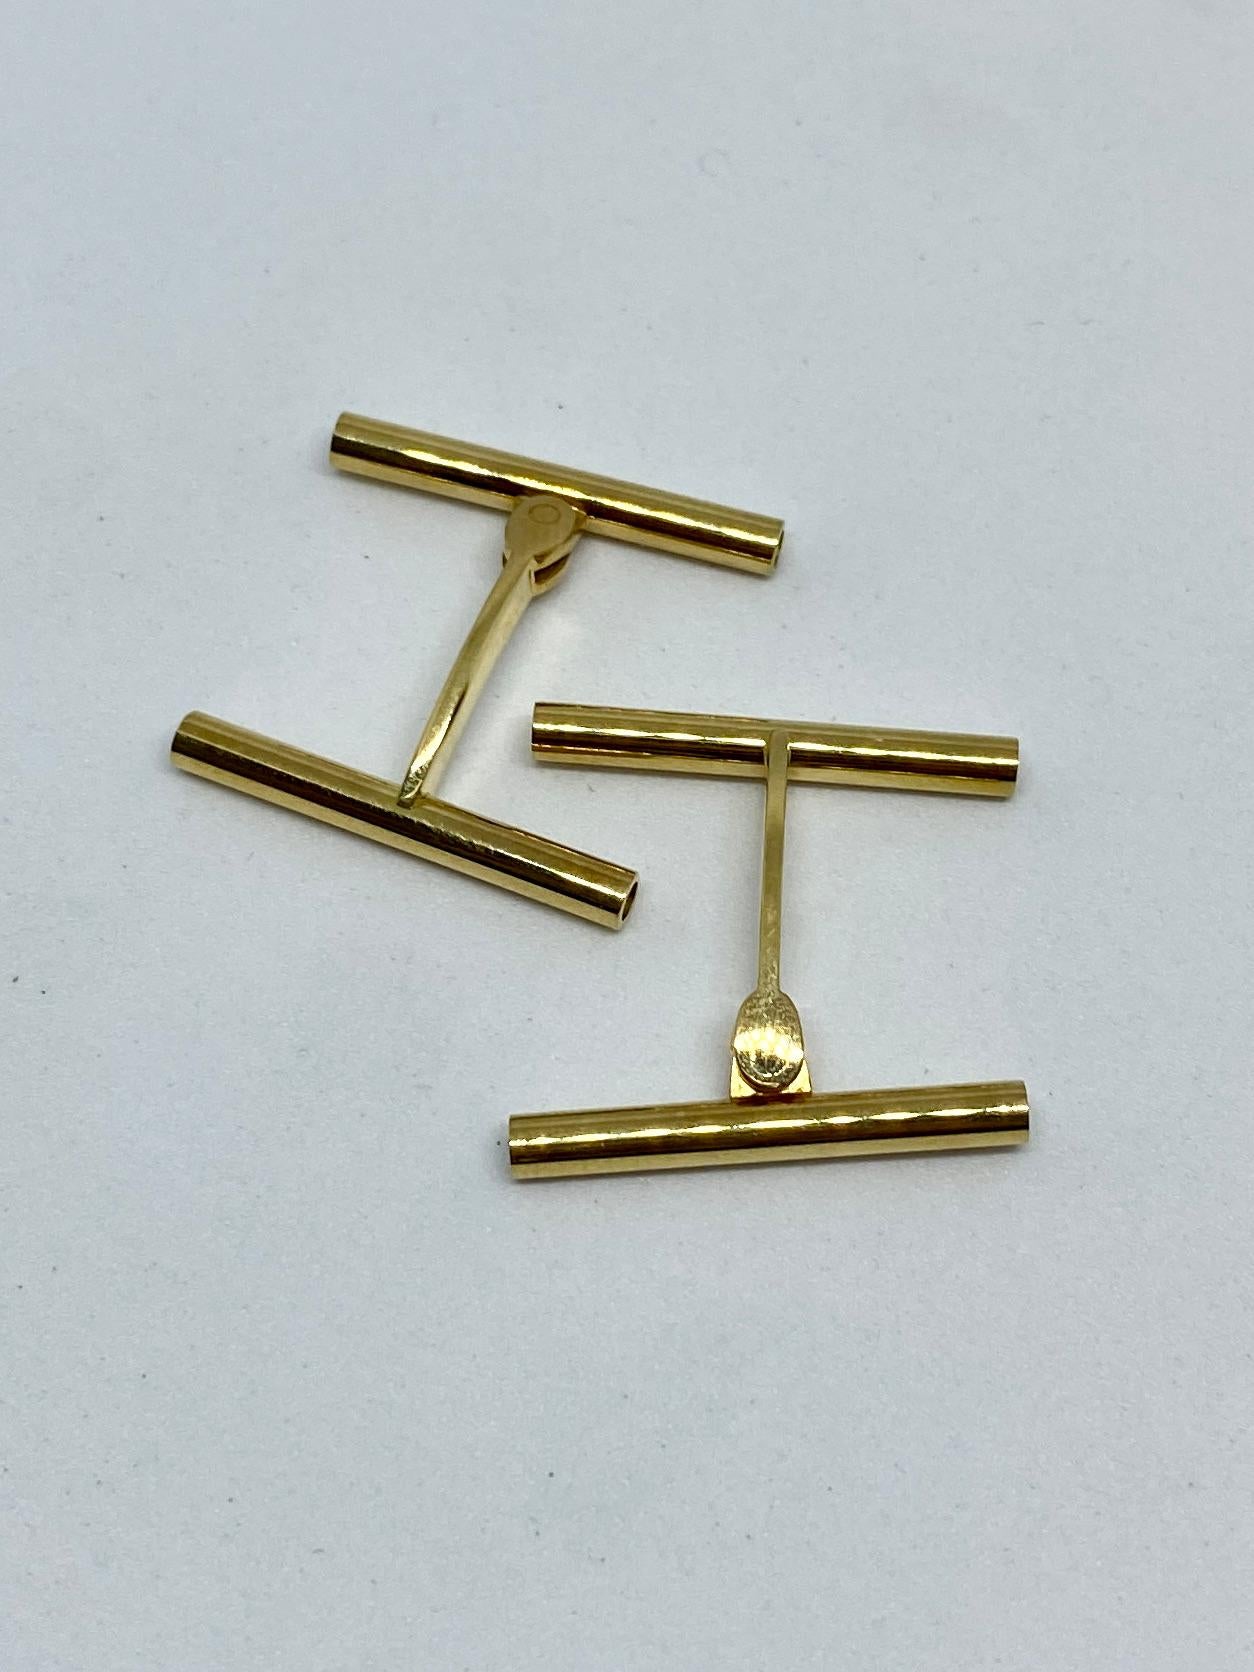 Extremely rare cufflinks by Georg Jensen in solid, 18K yellow gold.

Featuring hinged backs, the cufflinks are in excellent pre-owned condition, showing almost no signs of wear. The four tubes each measures 24mm long and 3mm in diameter. Together